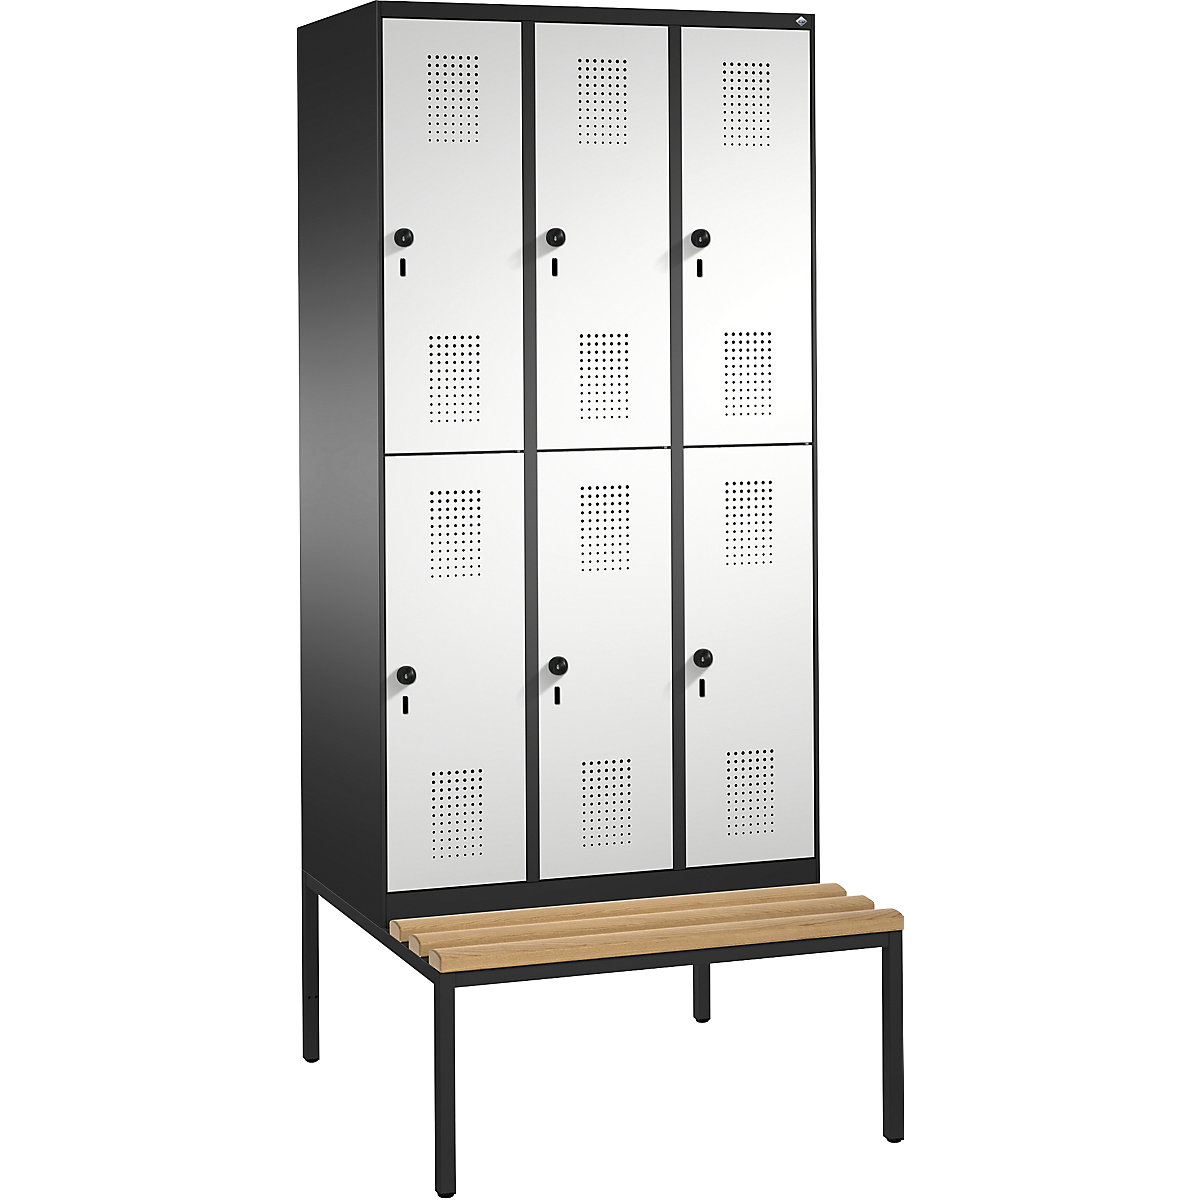 EVOLO cloakroom locker, double tier, with bench – C+P, 3 compartments, 2 shelf compartments each, compartment width 300 mm, black grey / light grey-5